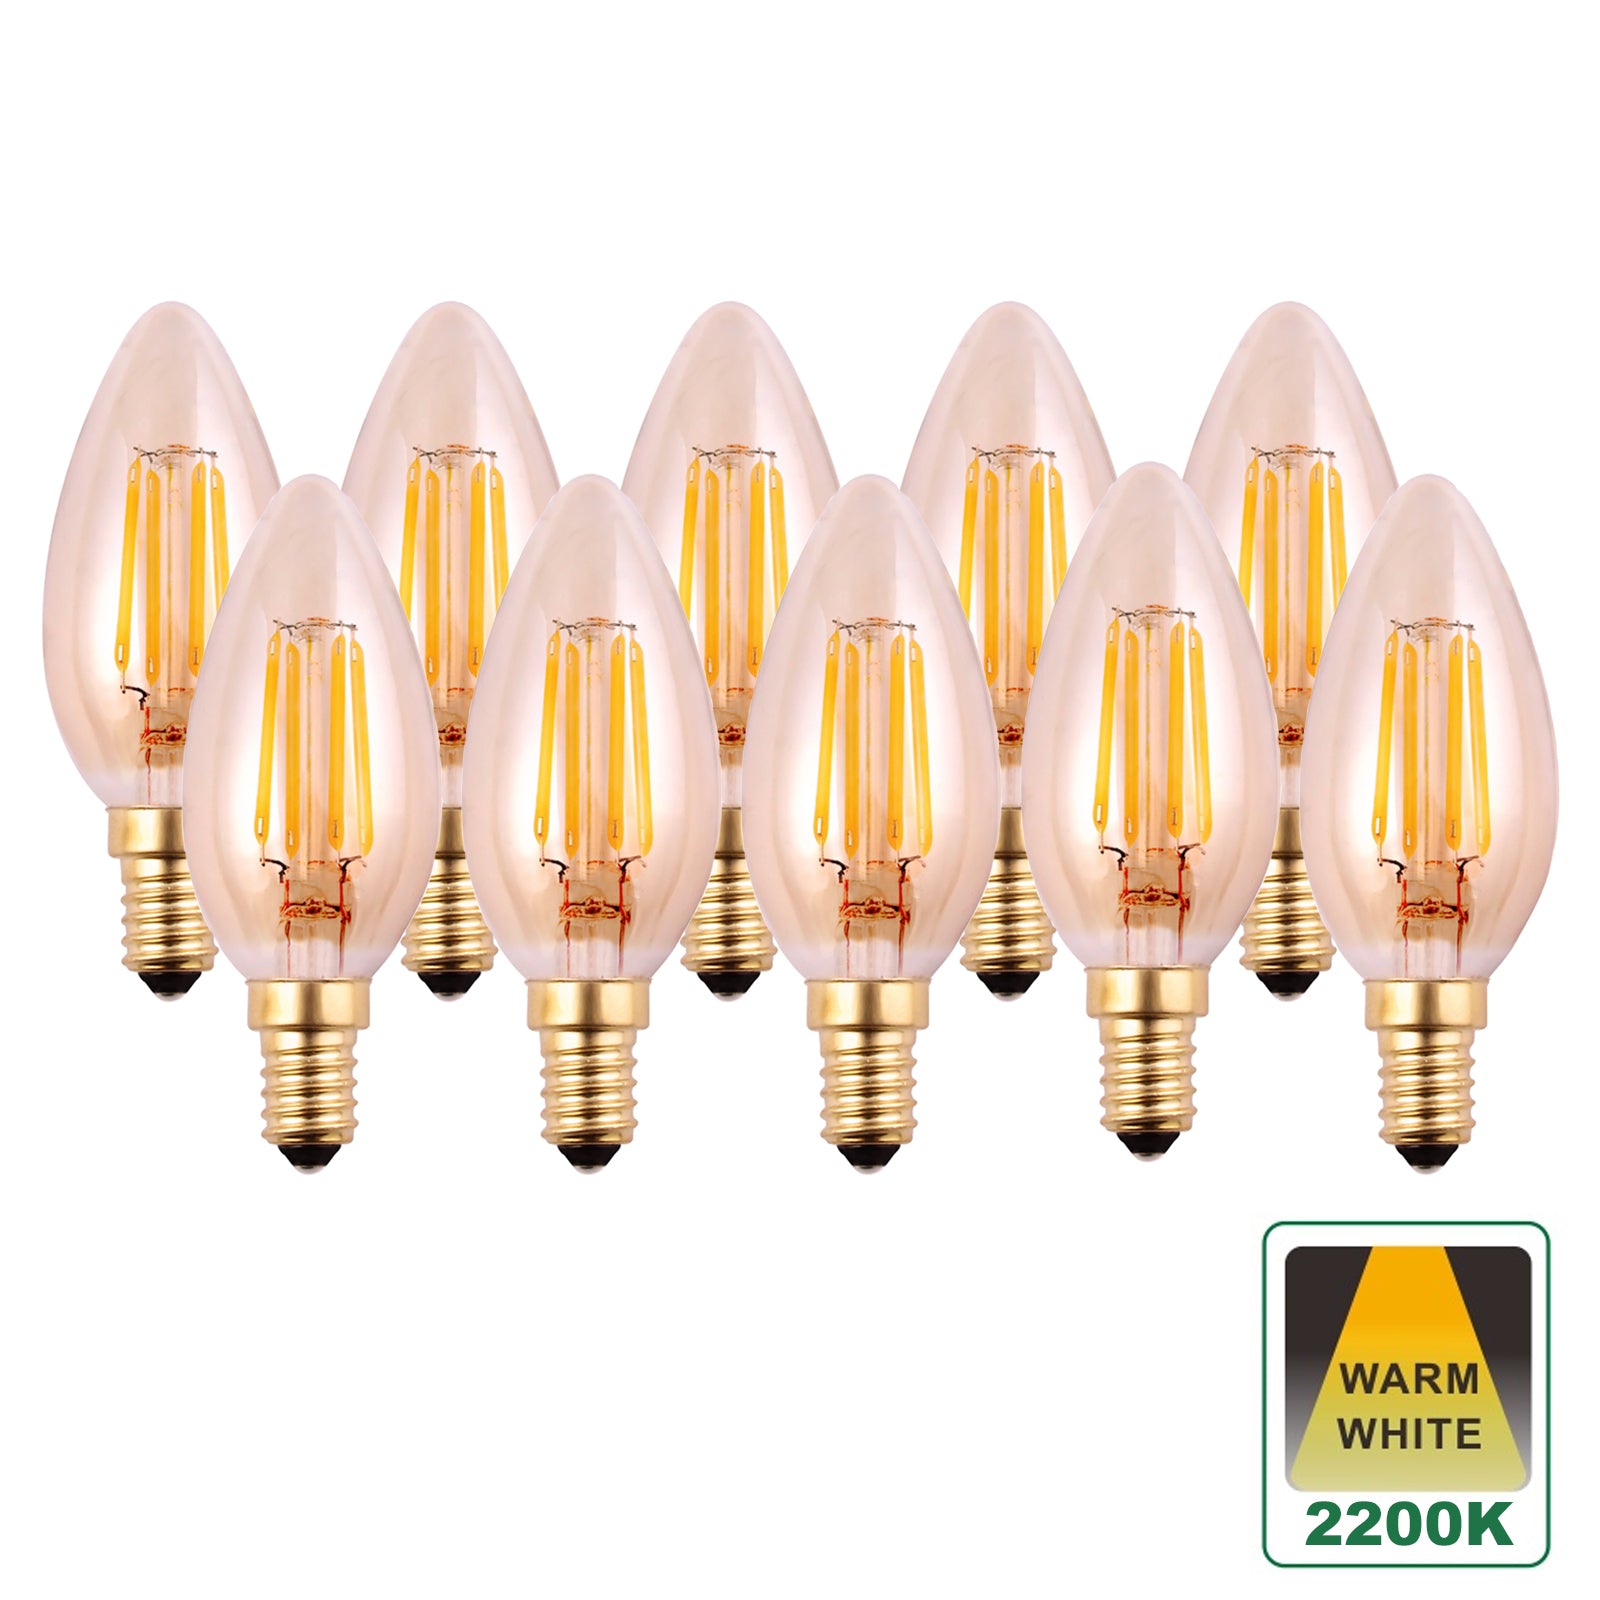 E14 Filament Candle Light Bulbs Amber Finish 4.5 Watts Dimmable LED SES, Warm White Packs of 10